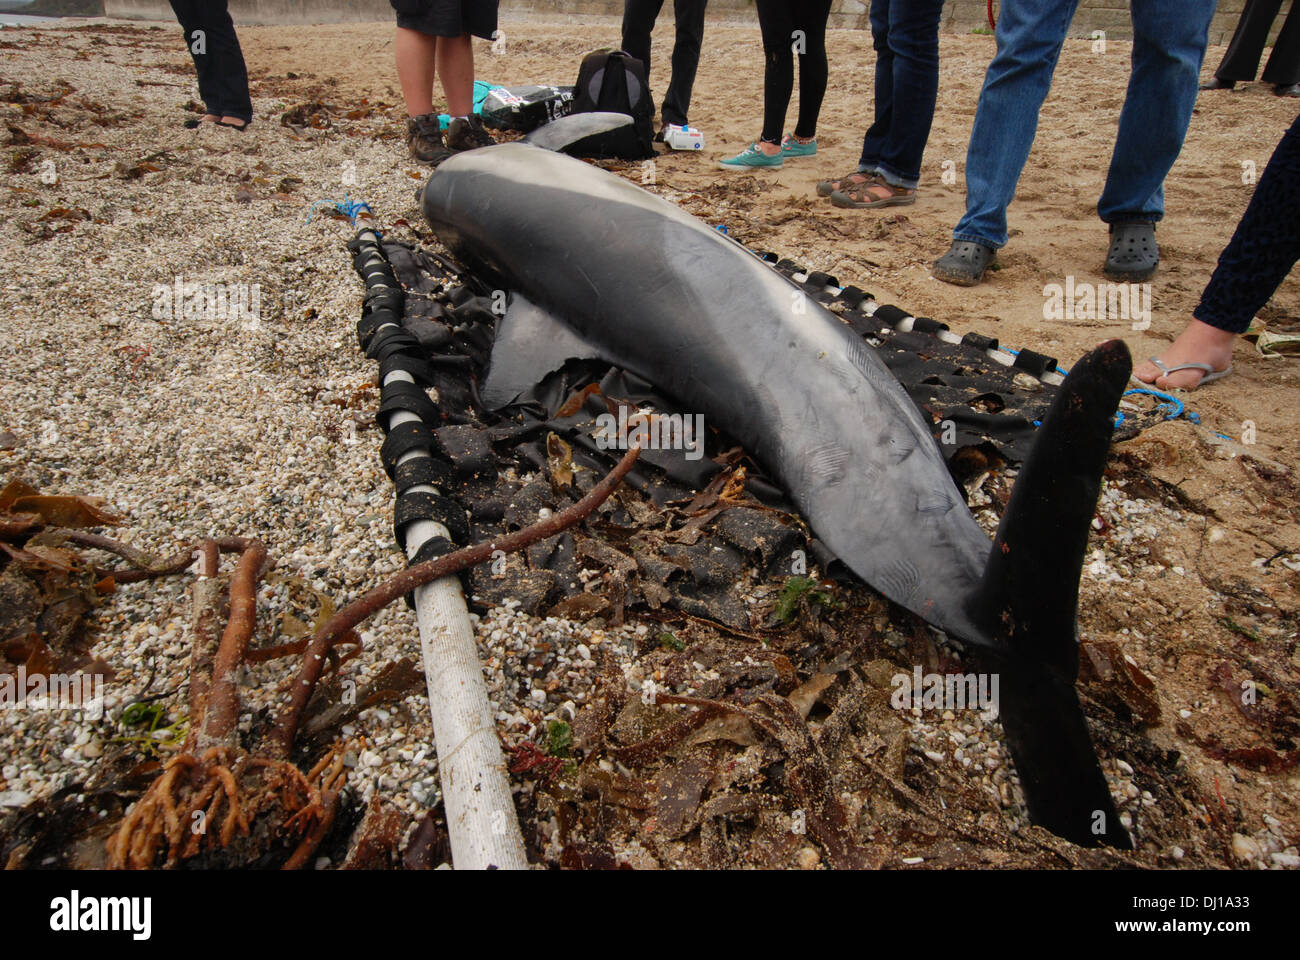 Cetacean stranding, Common dolphin (Delphinus), wounds along its body, rake marks and attacked marks Stock Photo